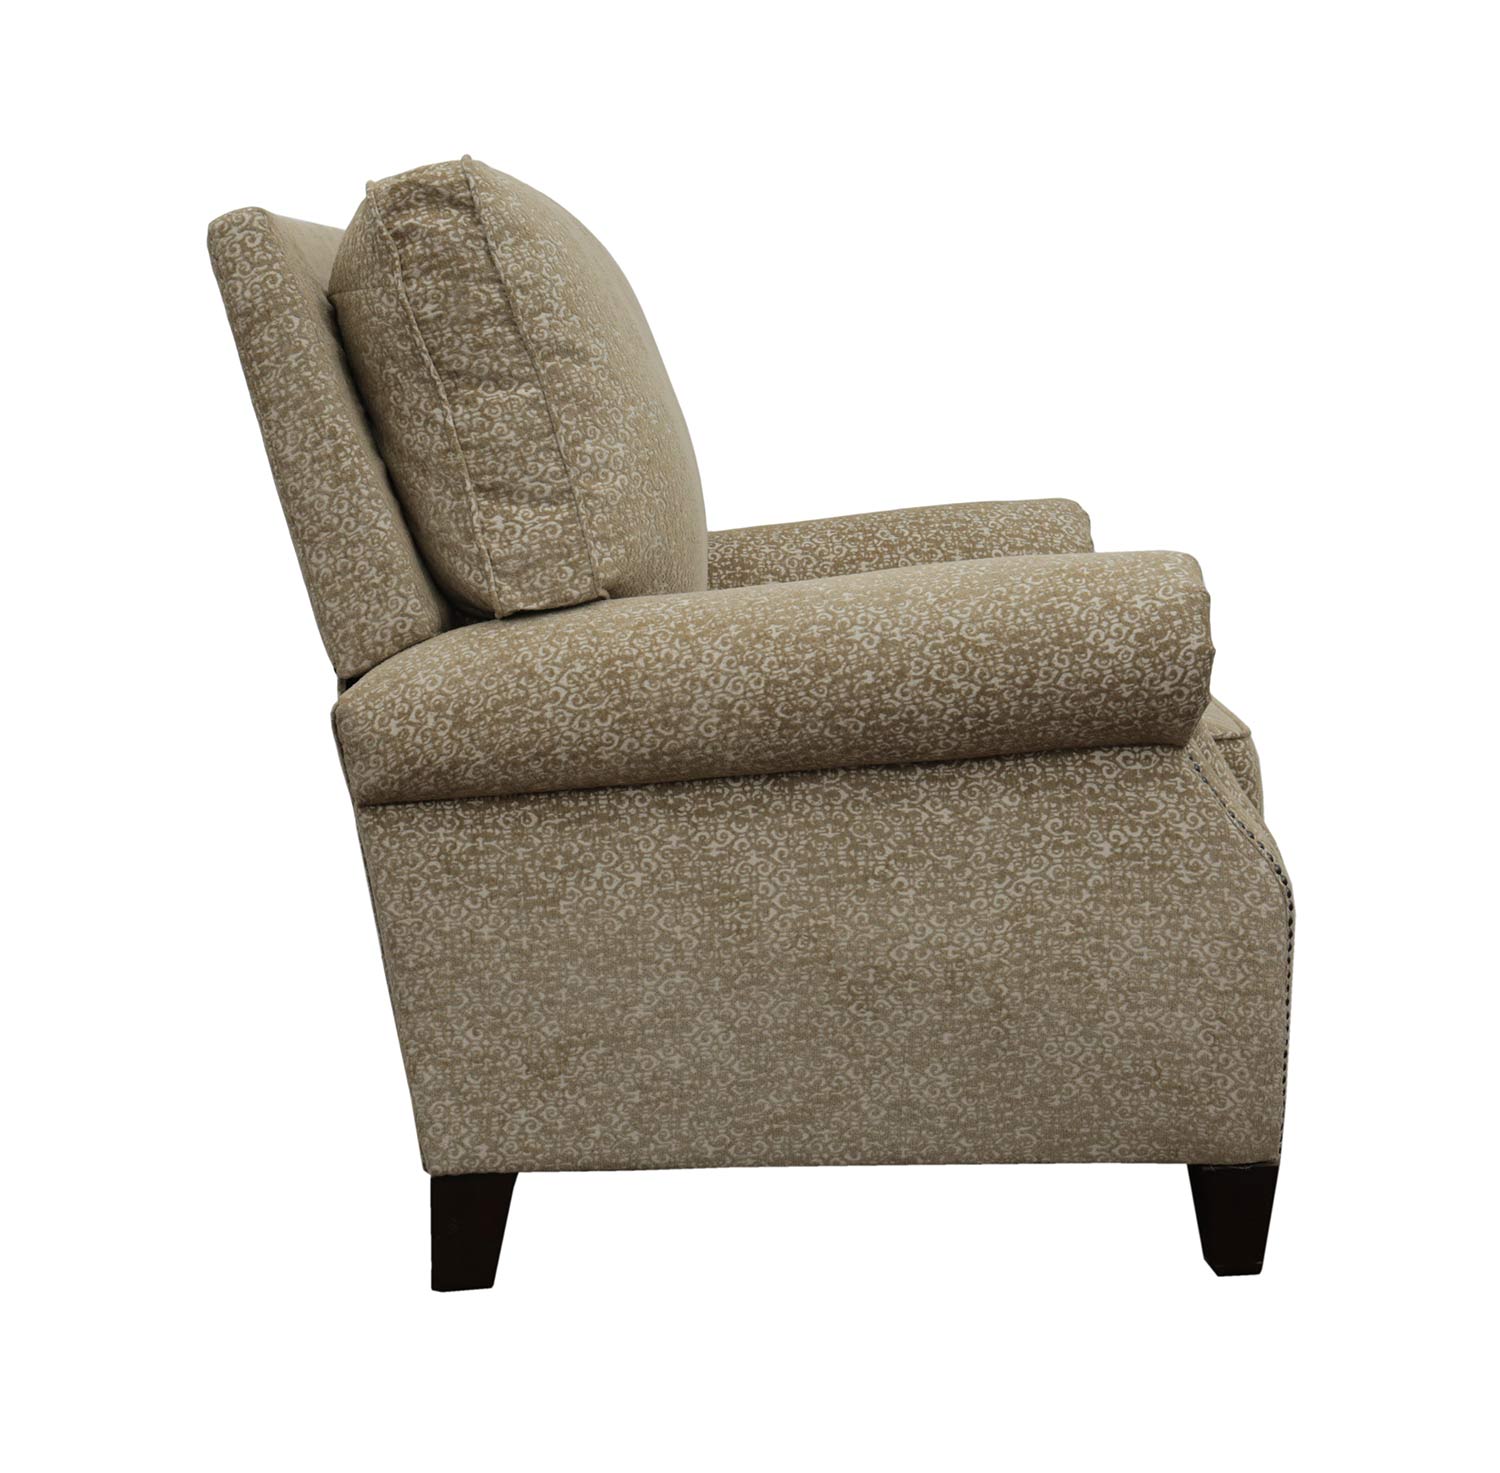 Barcalounger Briarwood Recliner Chair - Sandcastle/fabric